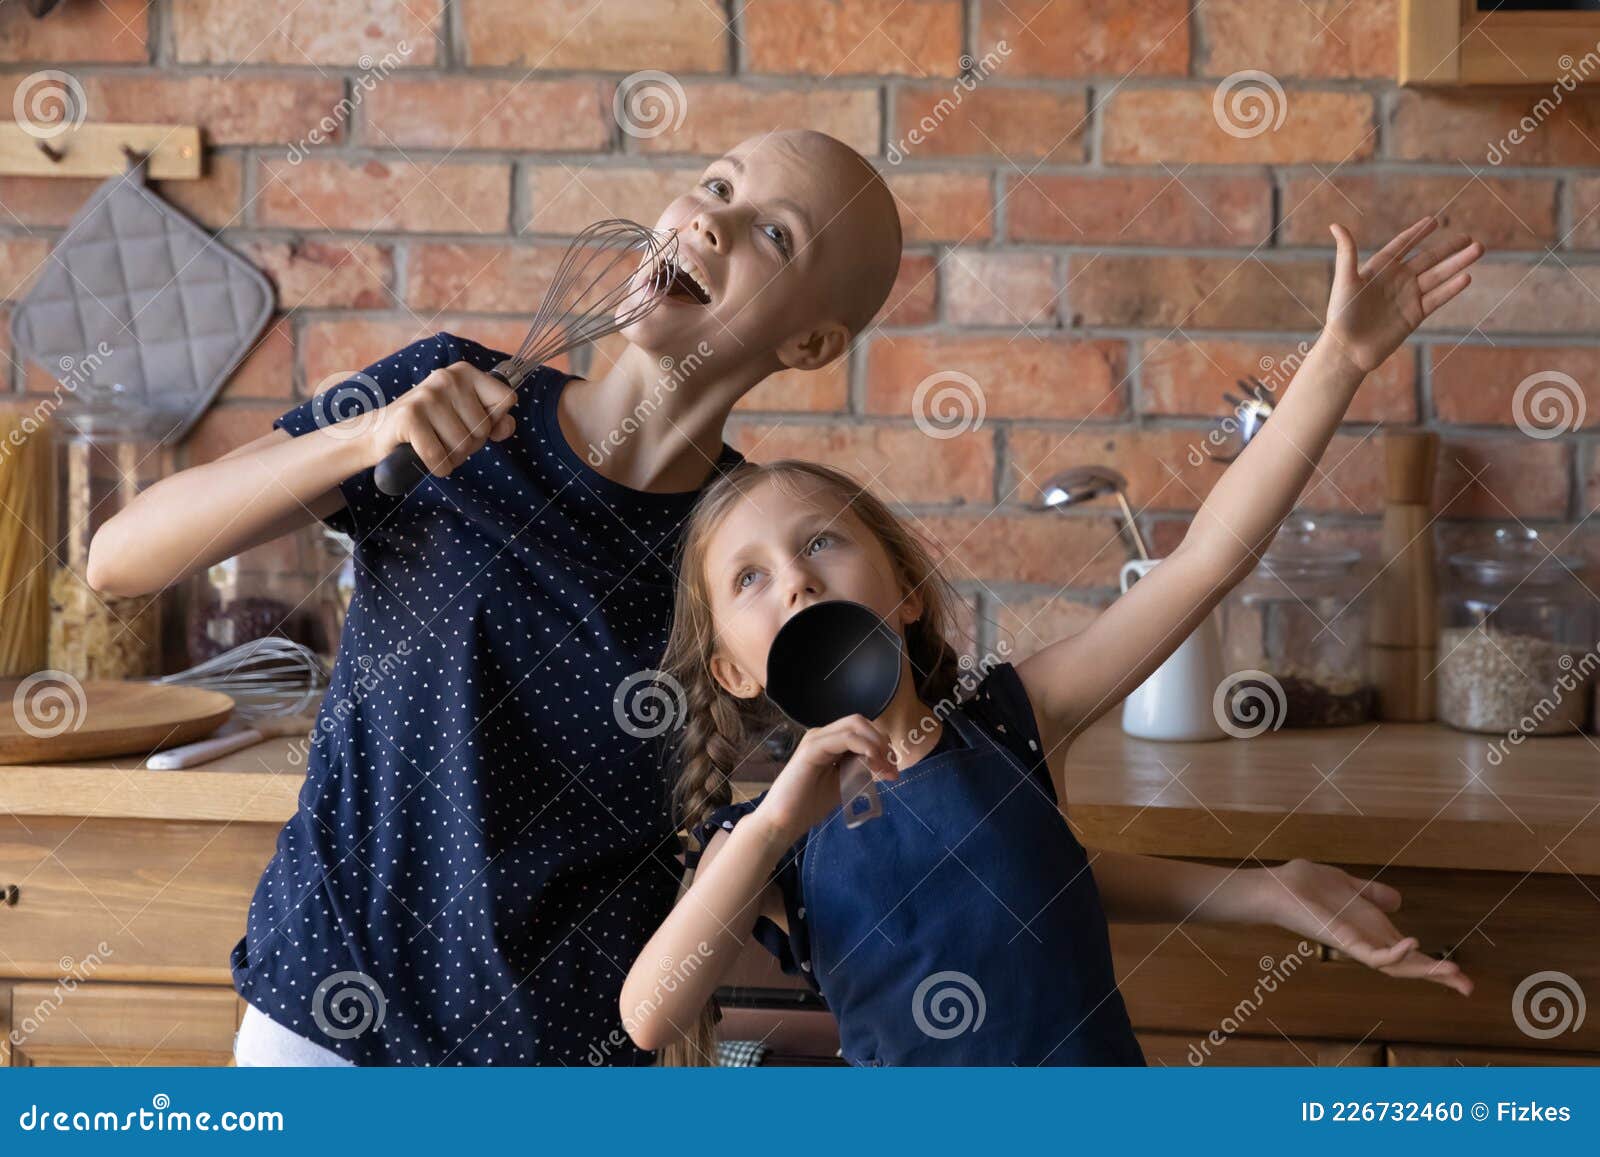 Excited Cancer Mom and Funny Little Daughter Playing Concert Stock Photo -  Image of dance, enjoy: 226732460